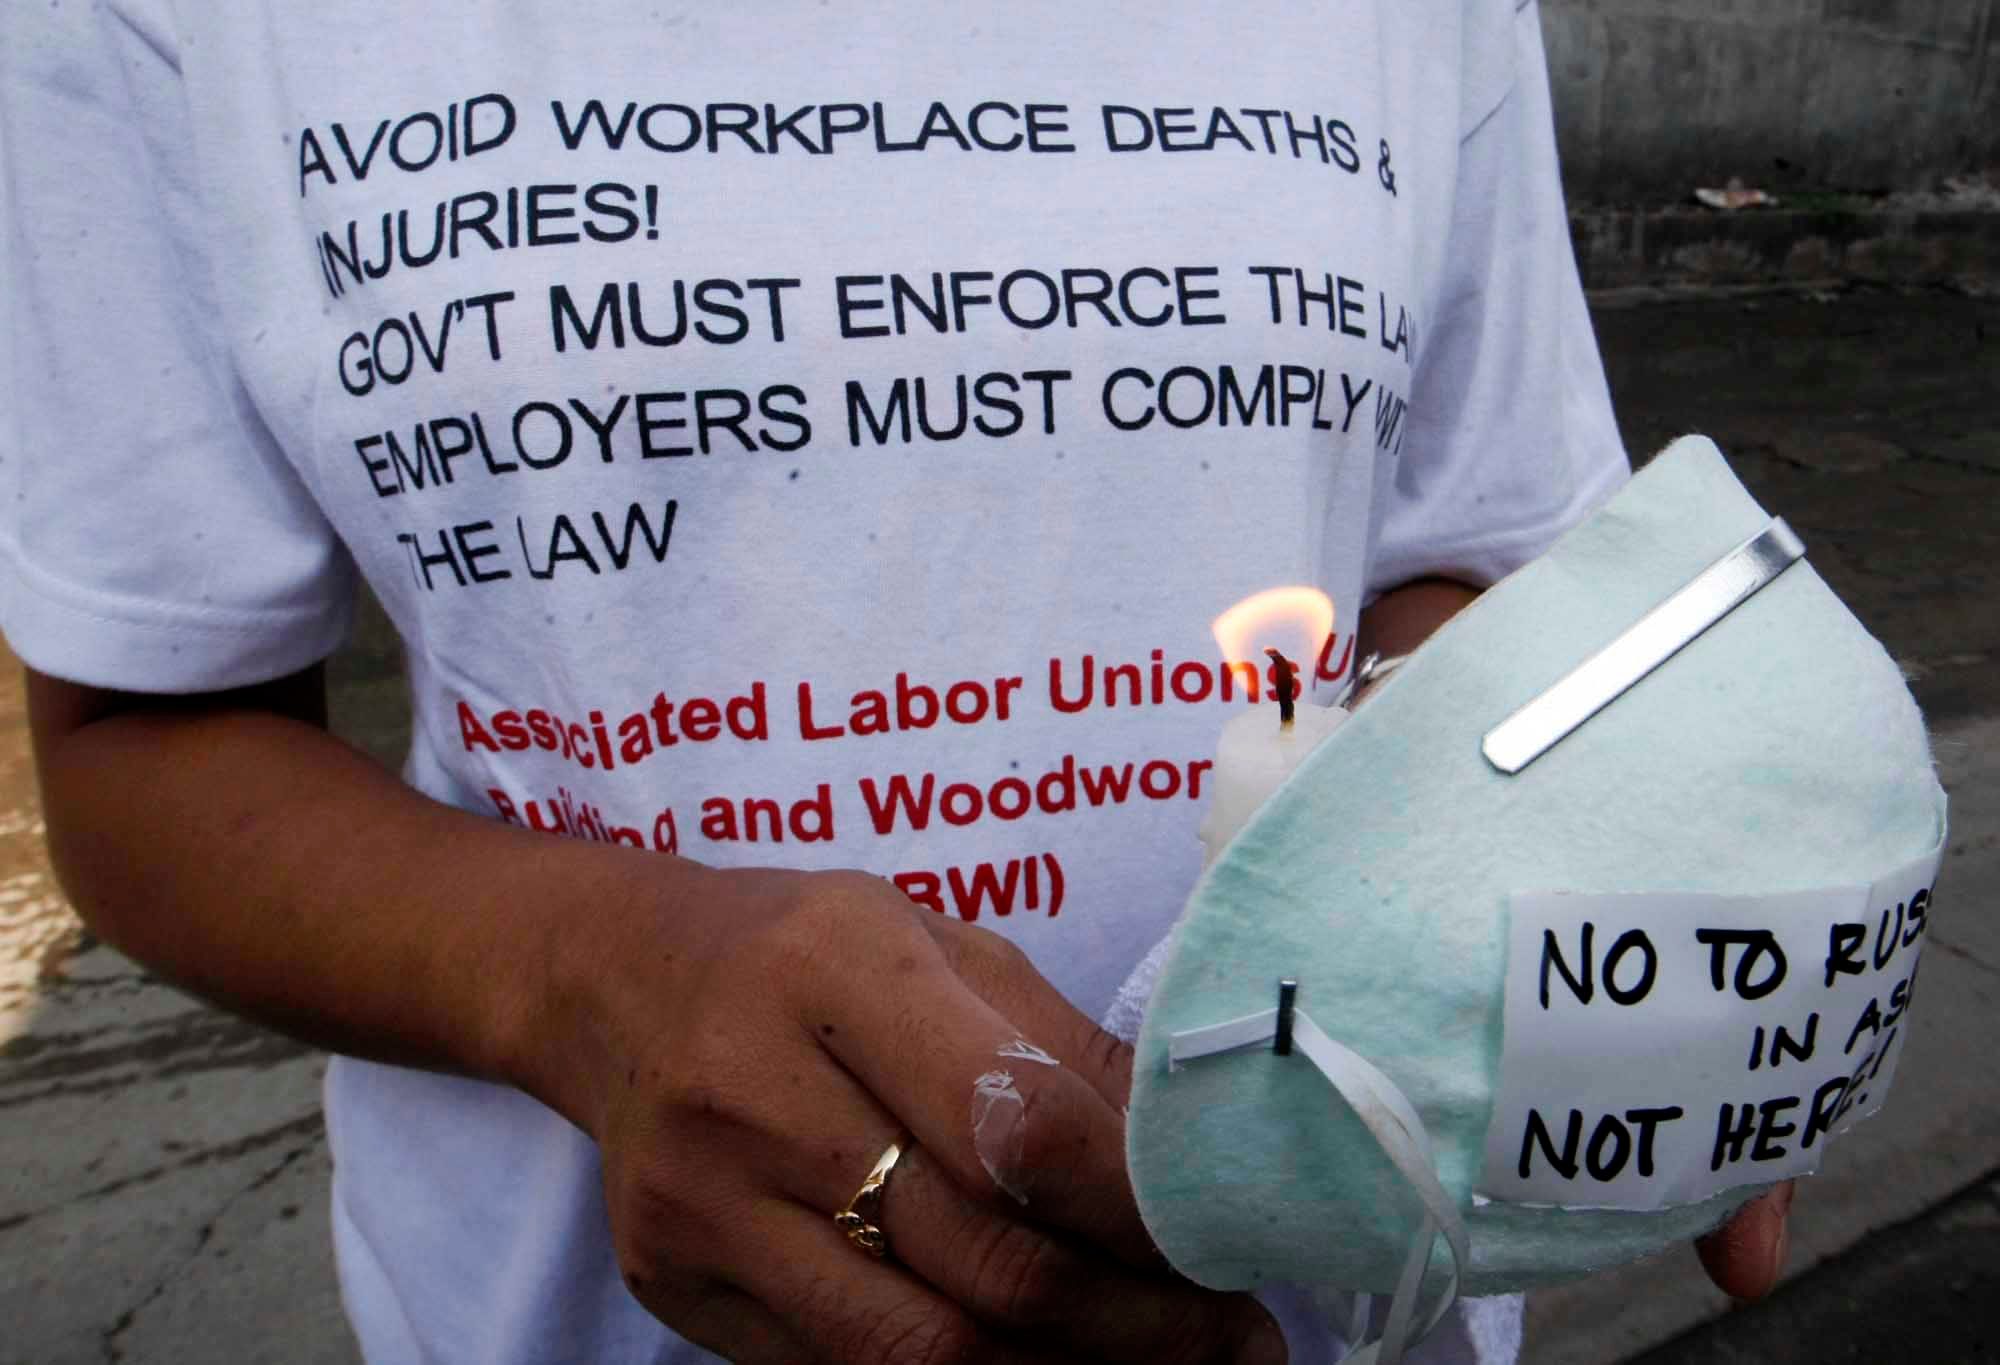 70% of work-related deaths worldwide occur in Asia Pacific – ILO